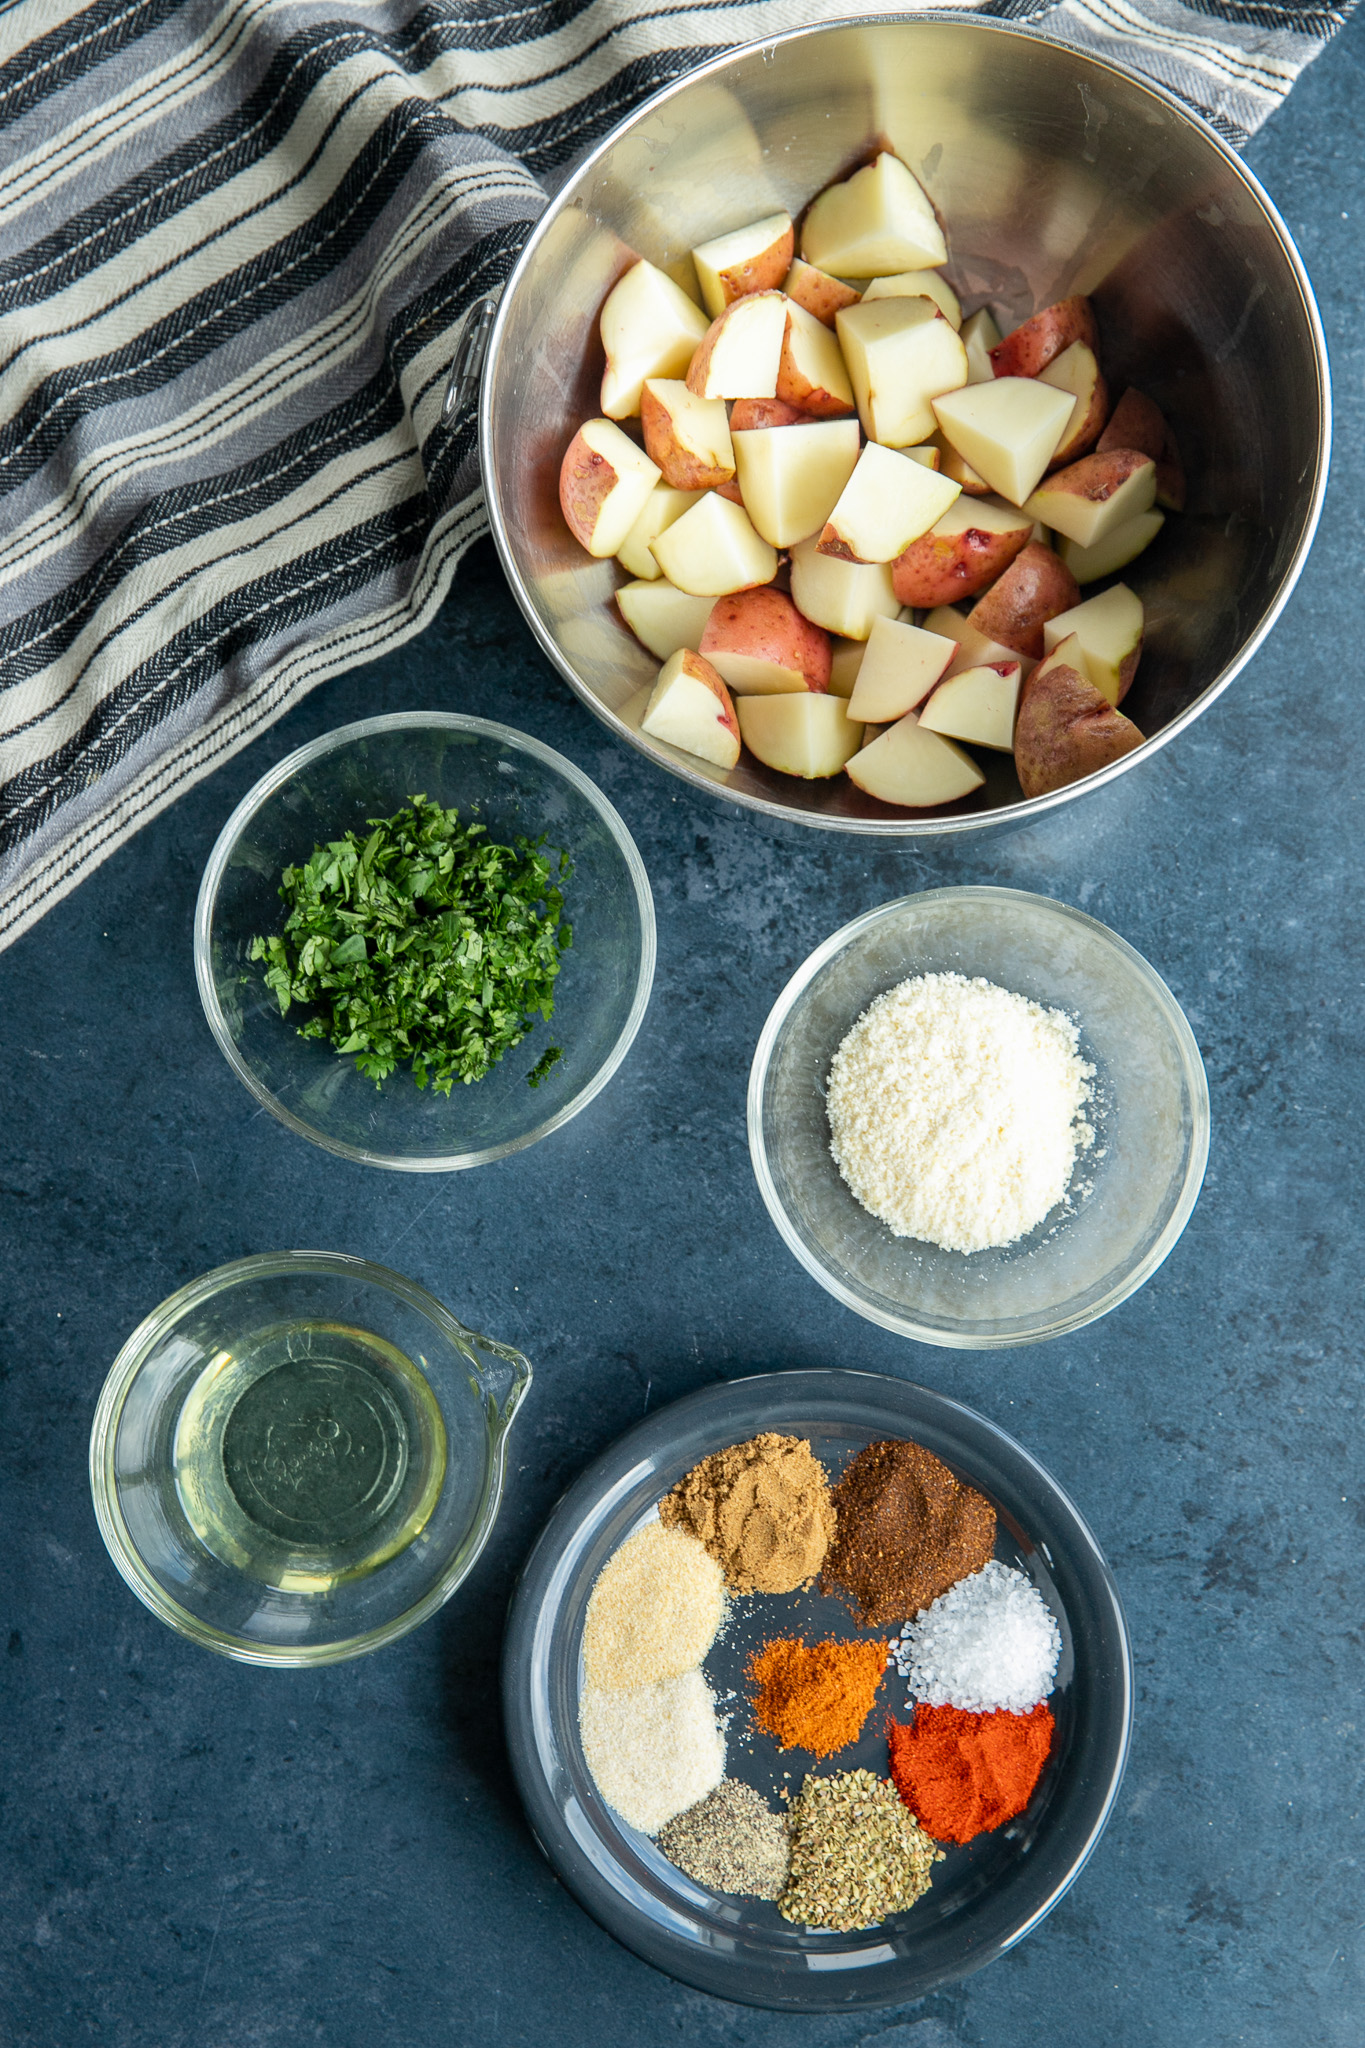 Ingredients for fried mexican potatoes image